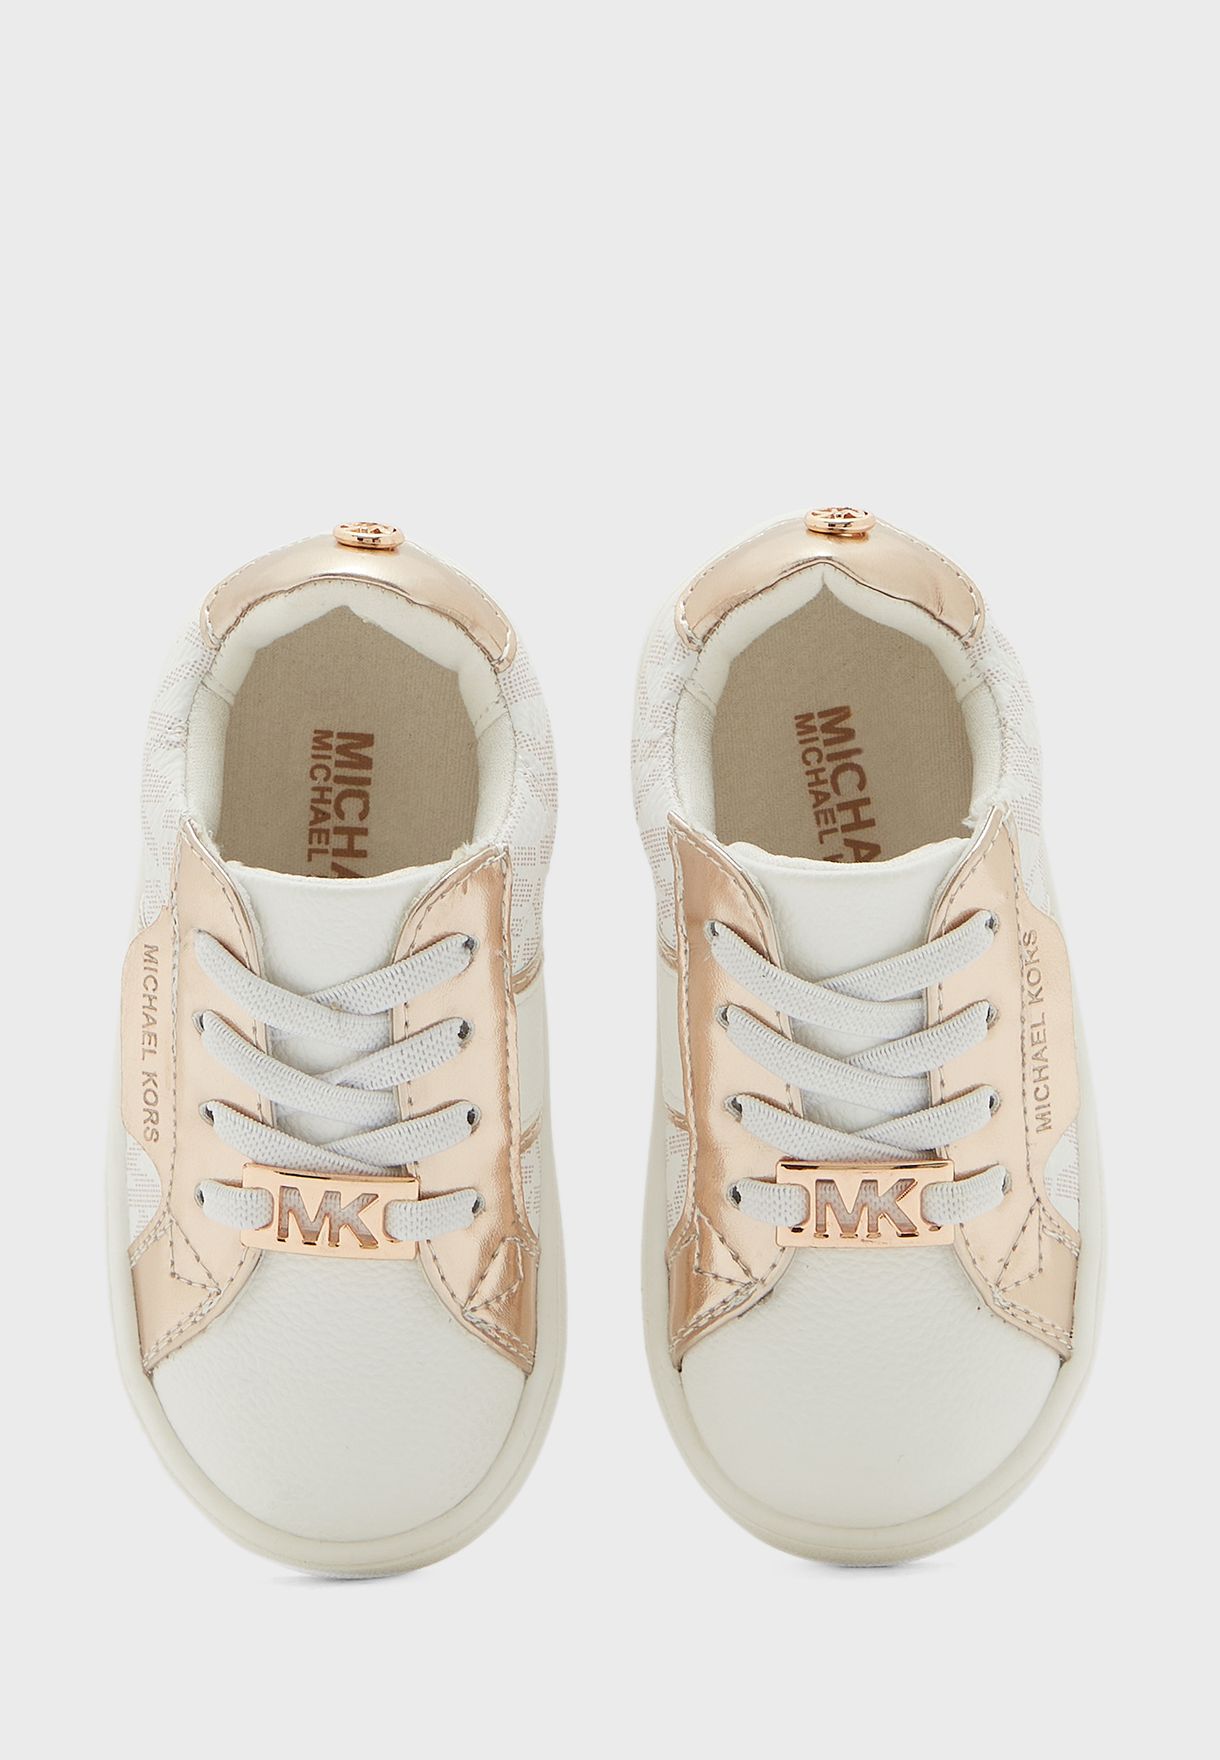 MICHAEL Michael Kors DASH TRAINER Pink  Nude  Pink  Gold  Fast delivery   Spartoo Europe   Shoes Low top trainers Women 19300 